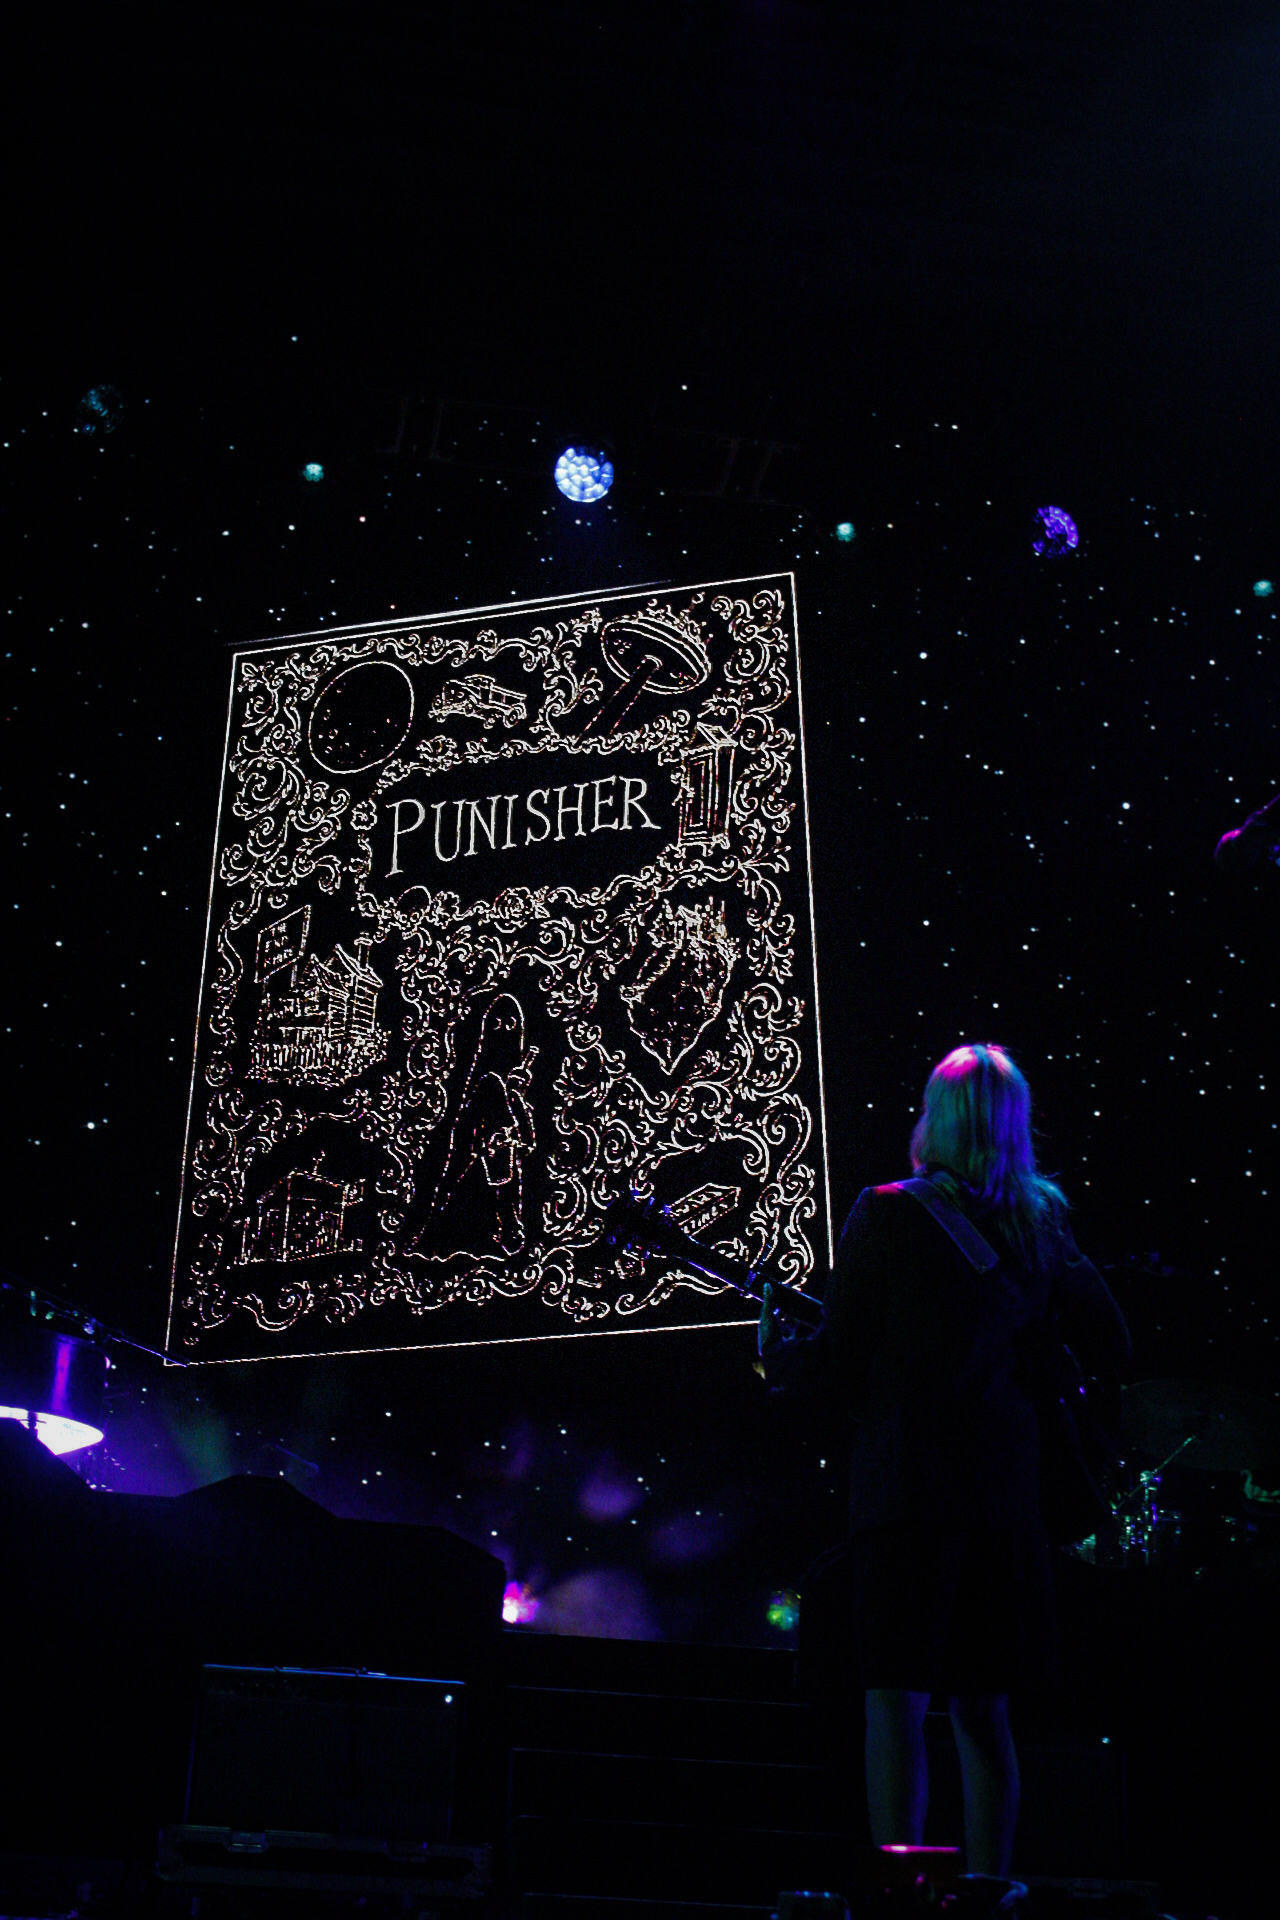 A graphic of a Punisher storybook appears with white sketches of lyrical elements – including a moon, ghost, “the end is near” sign. Phoebe Bridgers faces the screen holding a guitar.